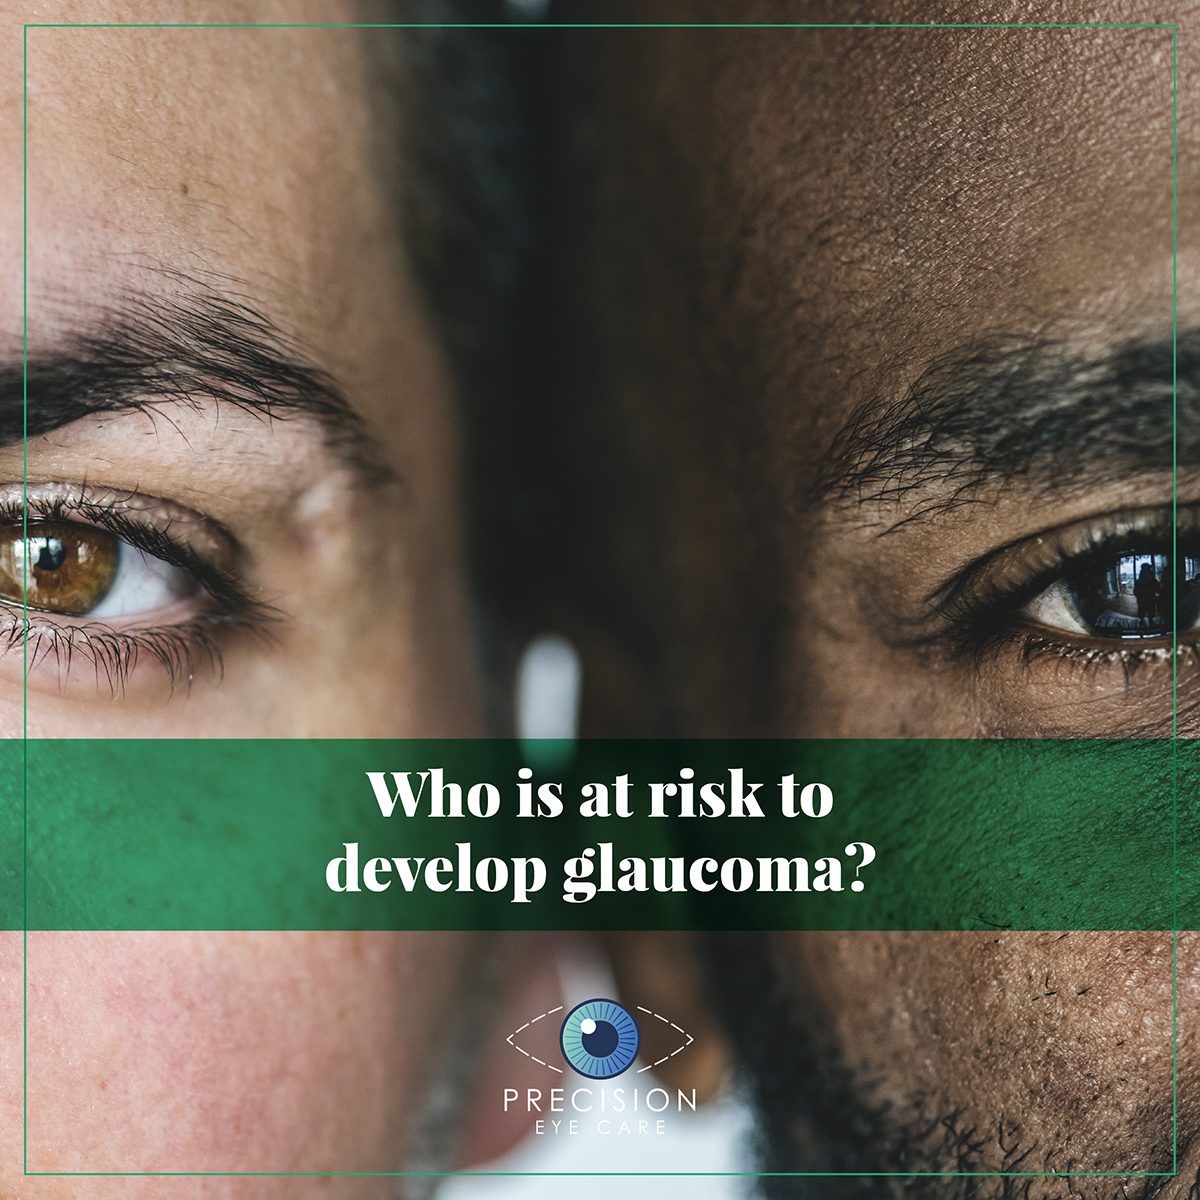 Who is at risk to develop glaucoma?